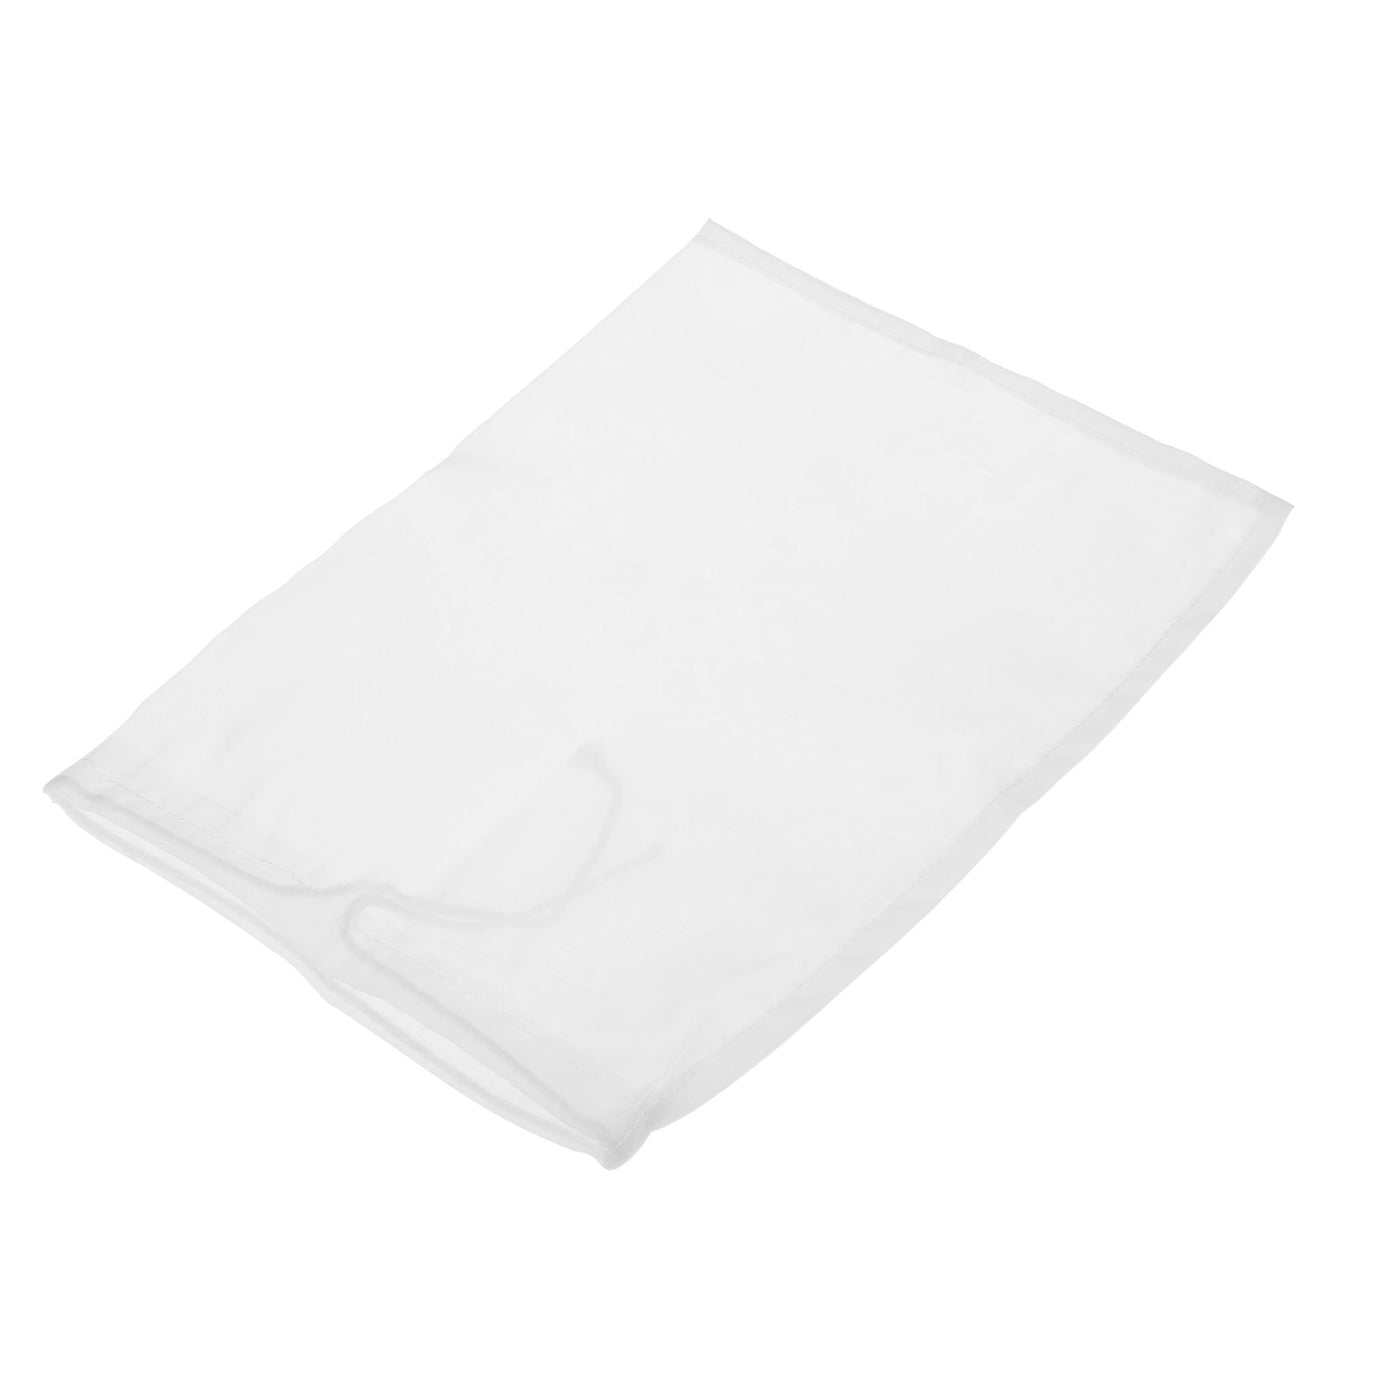 uxcell Uxcell Paint Filter Bag 100 Mesh (11.8"x7.9") Nylon Strainer for Filtering Paint